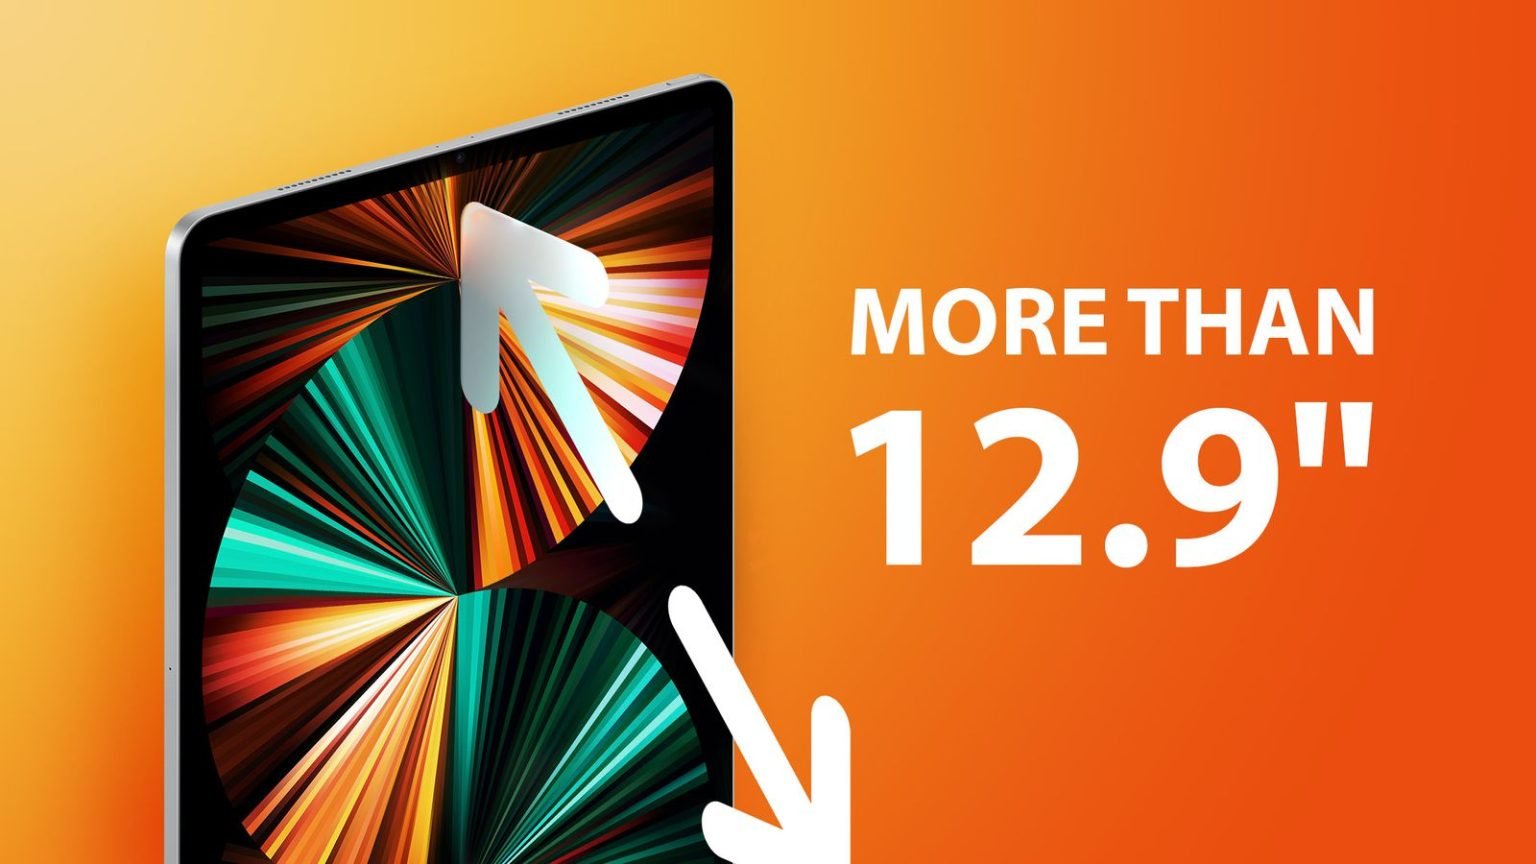 Ipad More Than 12.9 Inches Feature Orange